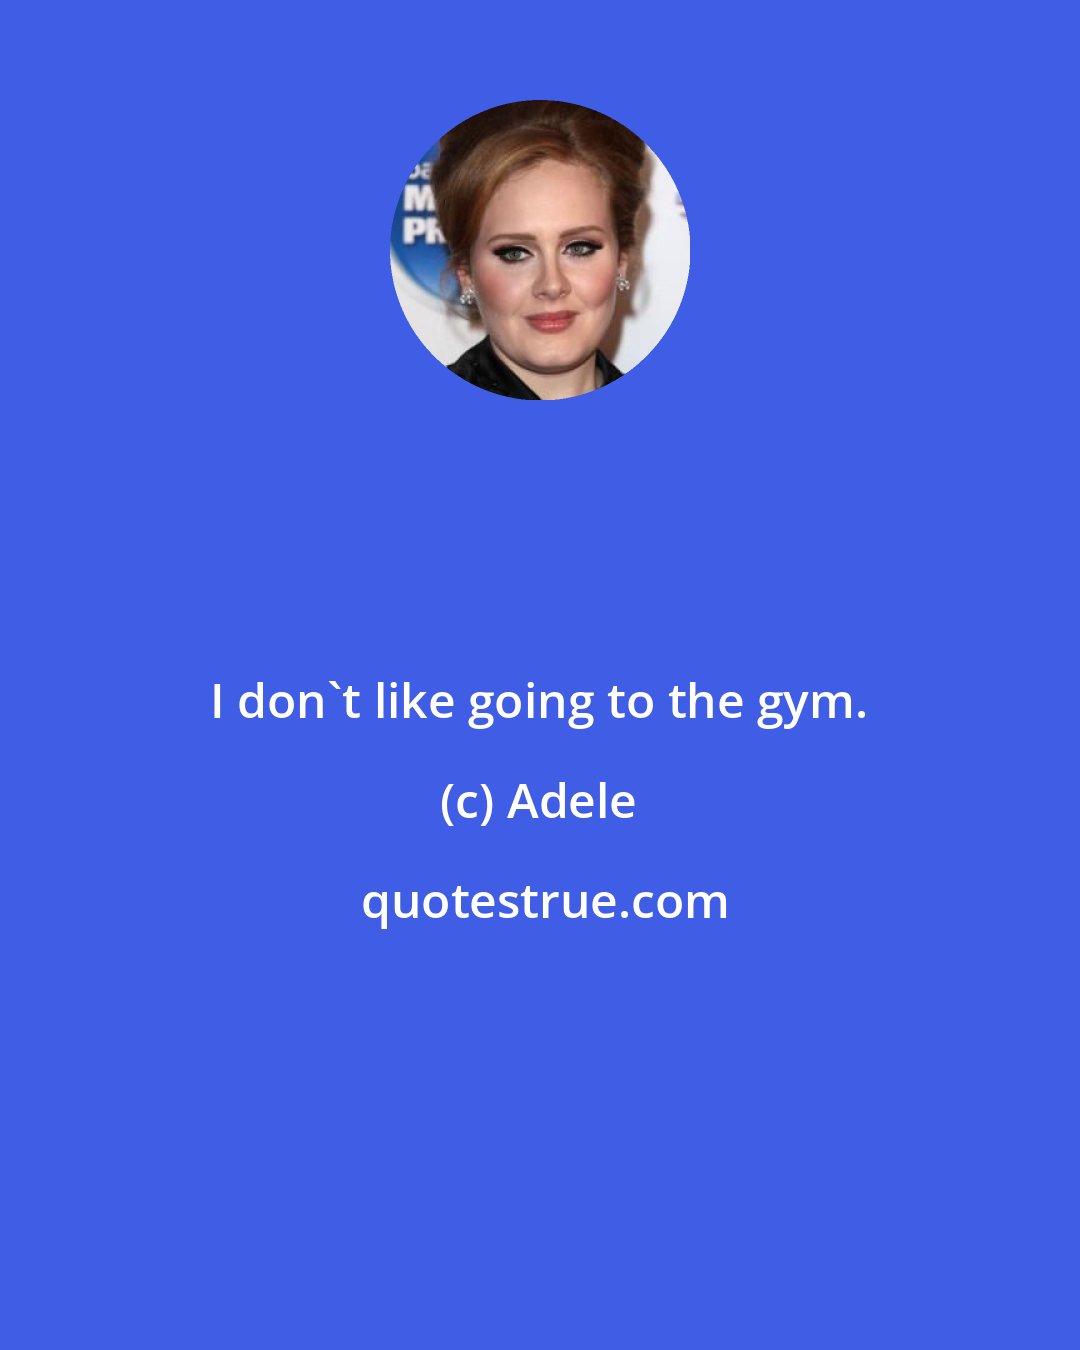 Adele: I don't like going to the gym.